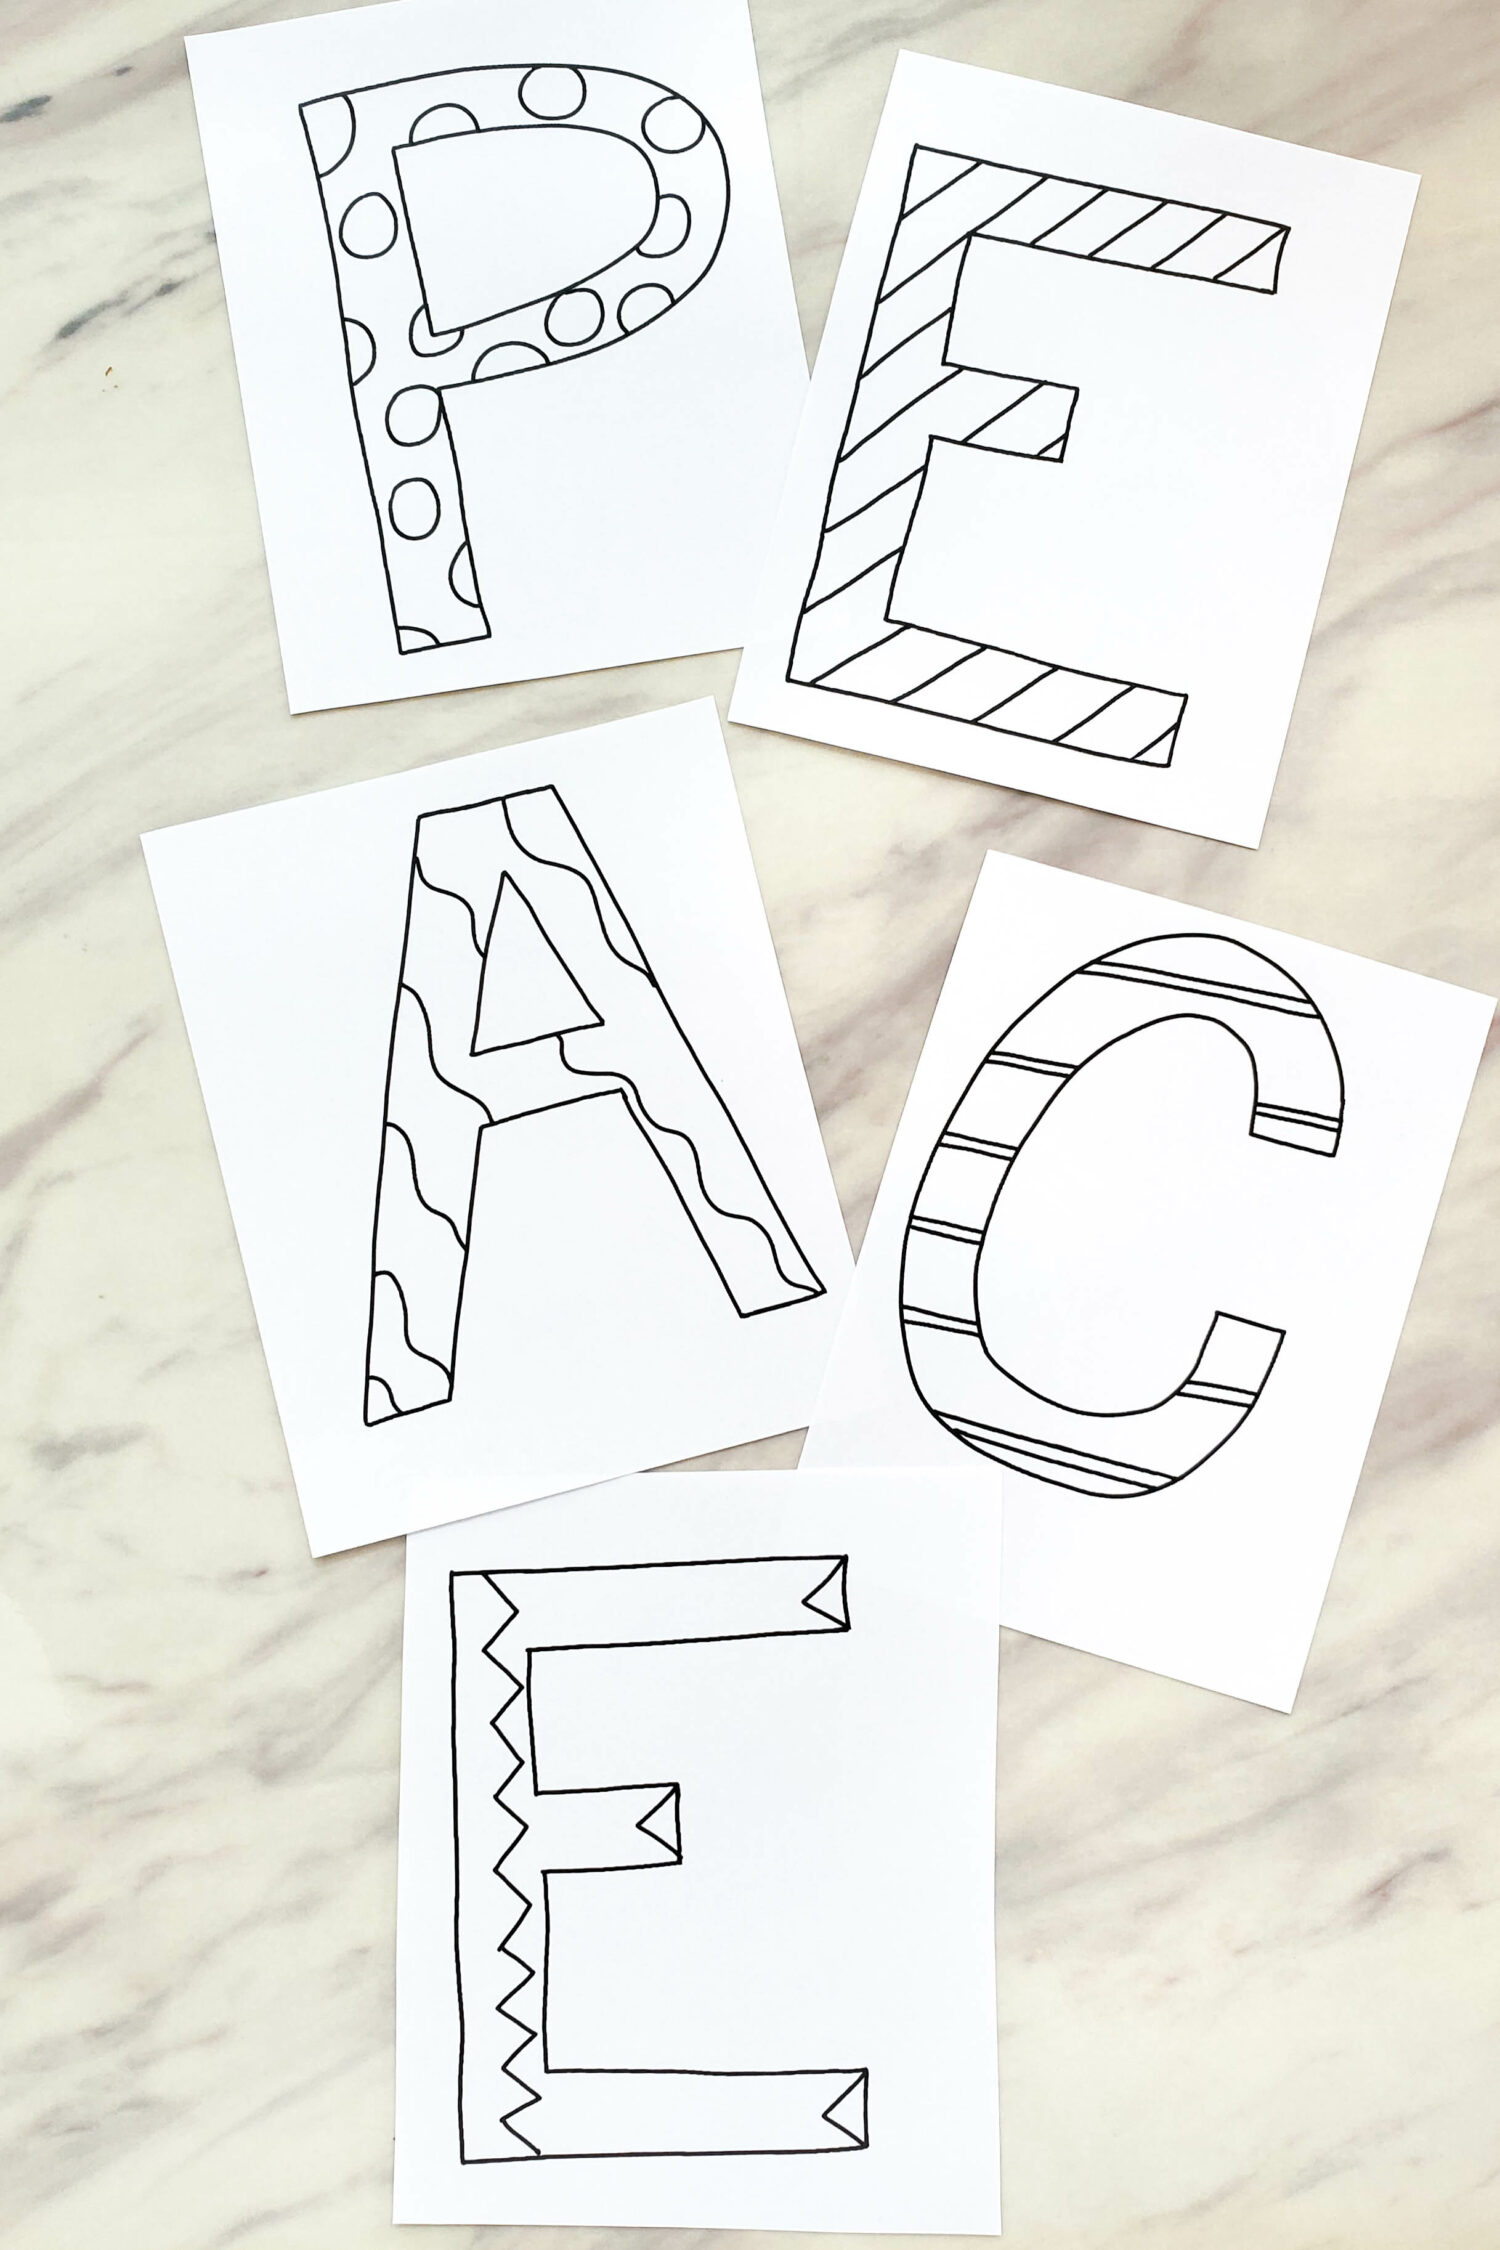 Prince of Peace Letter Hunt search for the 5 letters P-E-A-C-E as you sing through the song with lots of singing repetition! A fun no-prep singing time game! Then, share ways that you feel Peace and how Jesus Christ brings you peace! Printable song helps for LDS Primary music leaders.